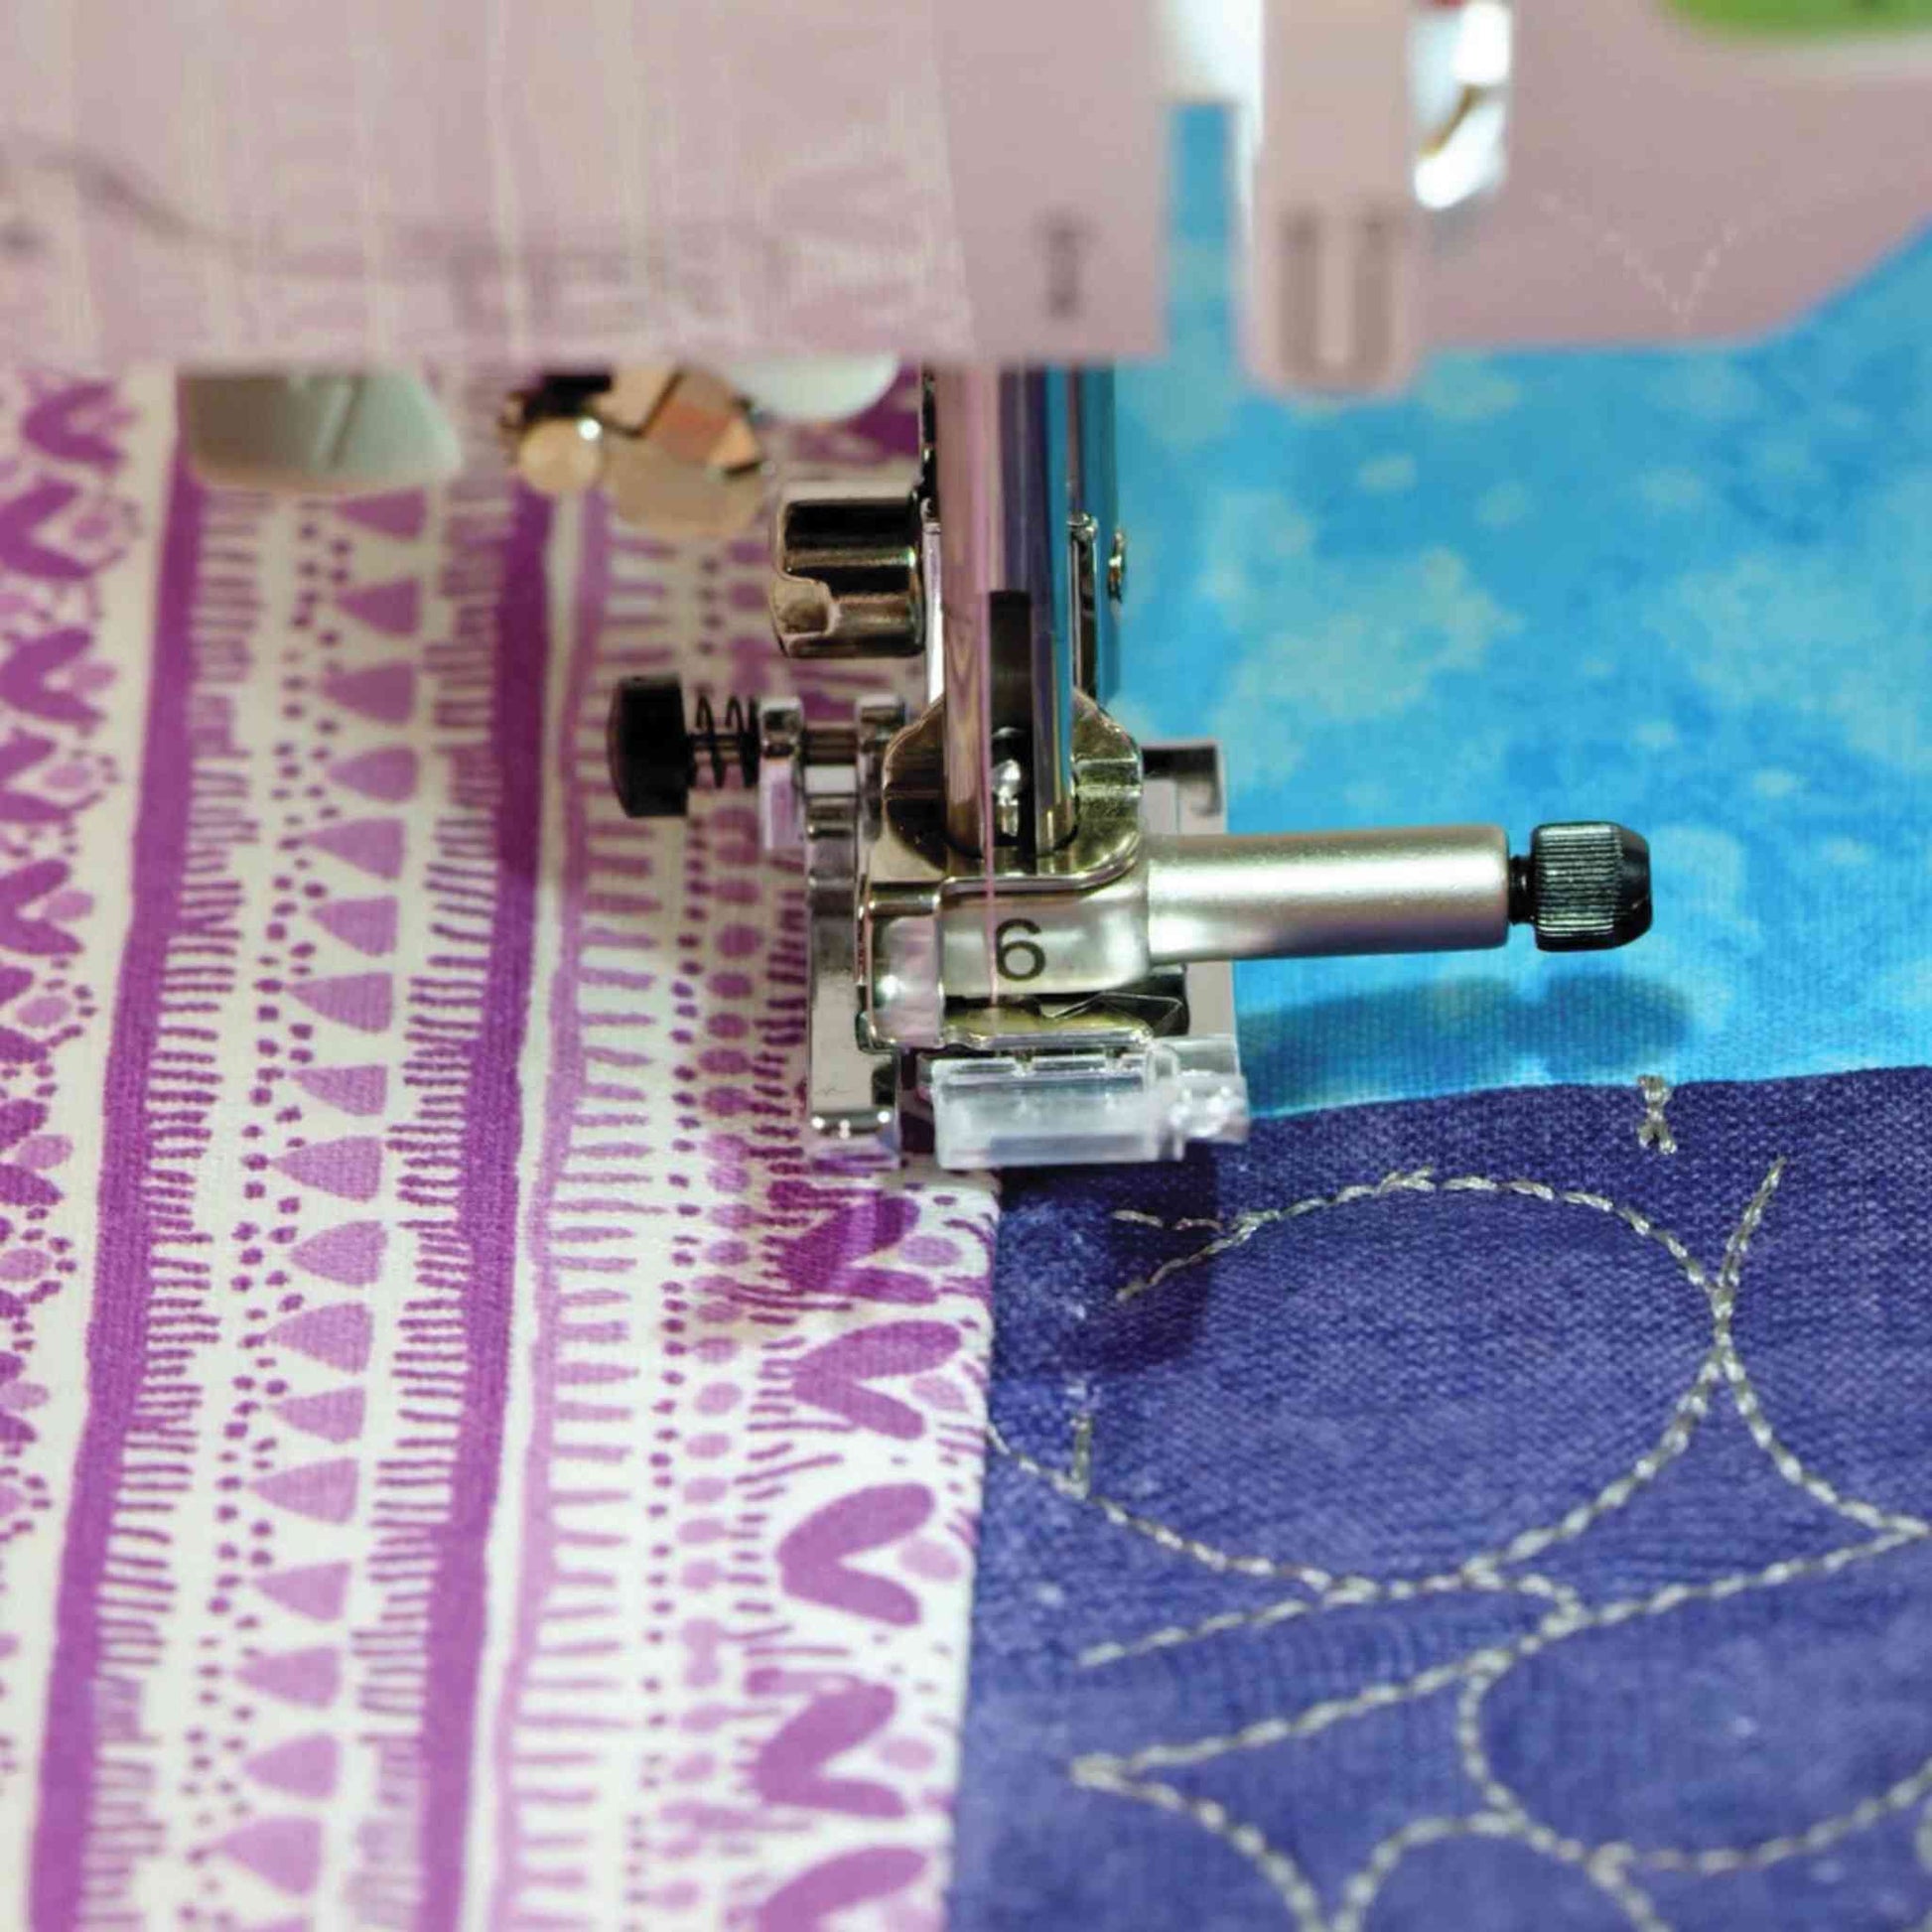 brother nv2700 sewing and embroidery machine using pivot function